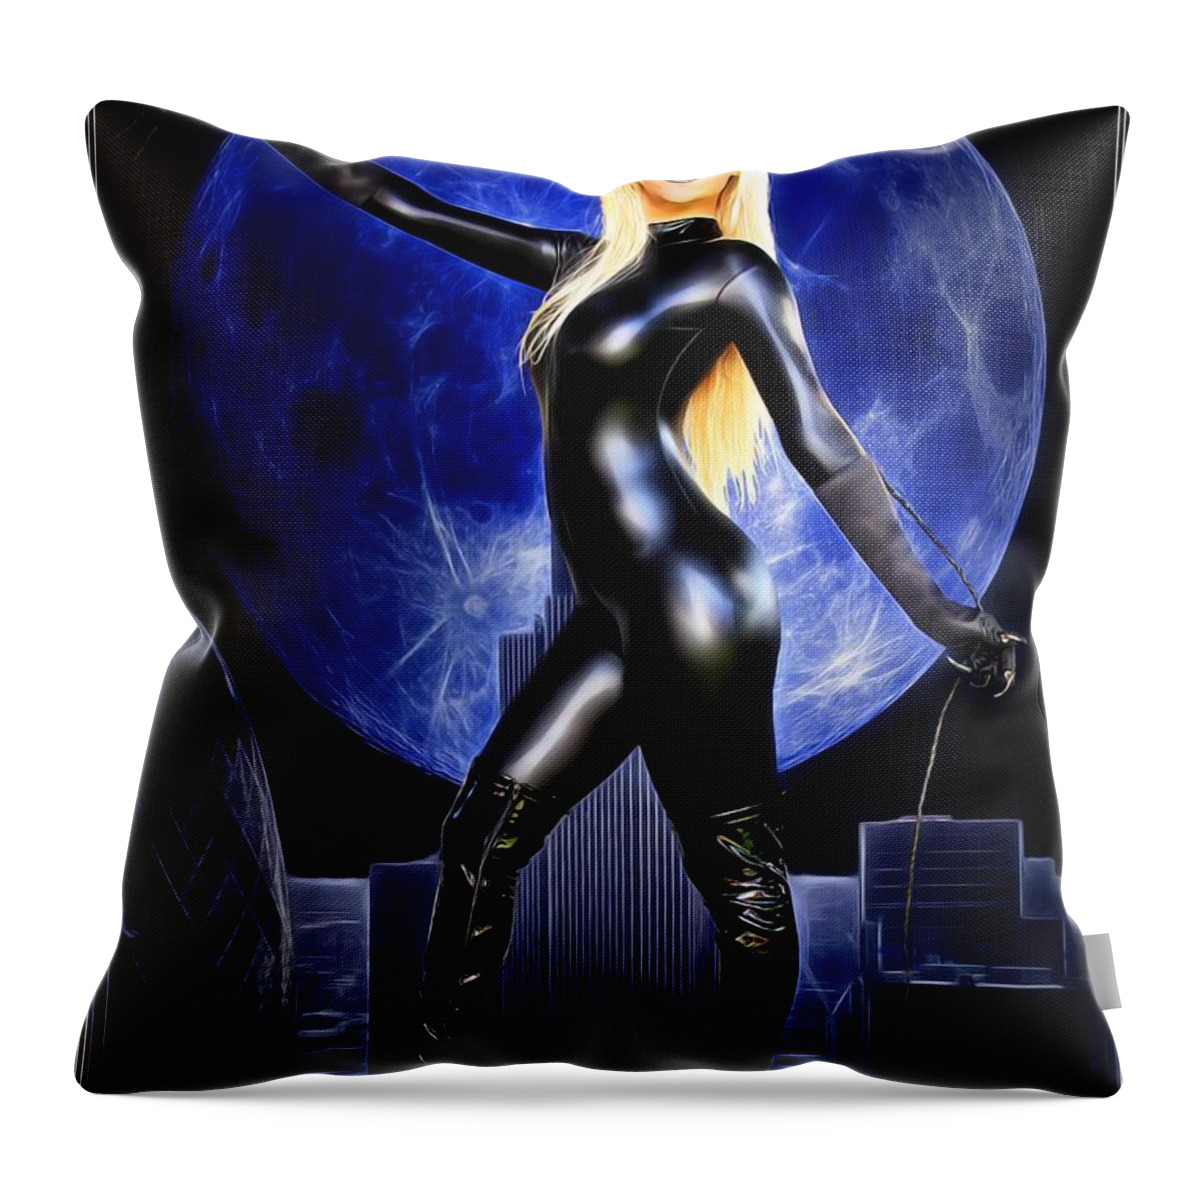 Fantasy Throw Pillow featuring the painting Once In A Blue Moon by Jon Volden